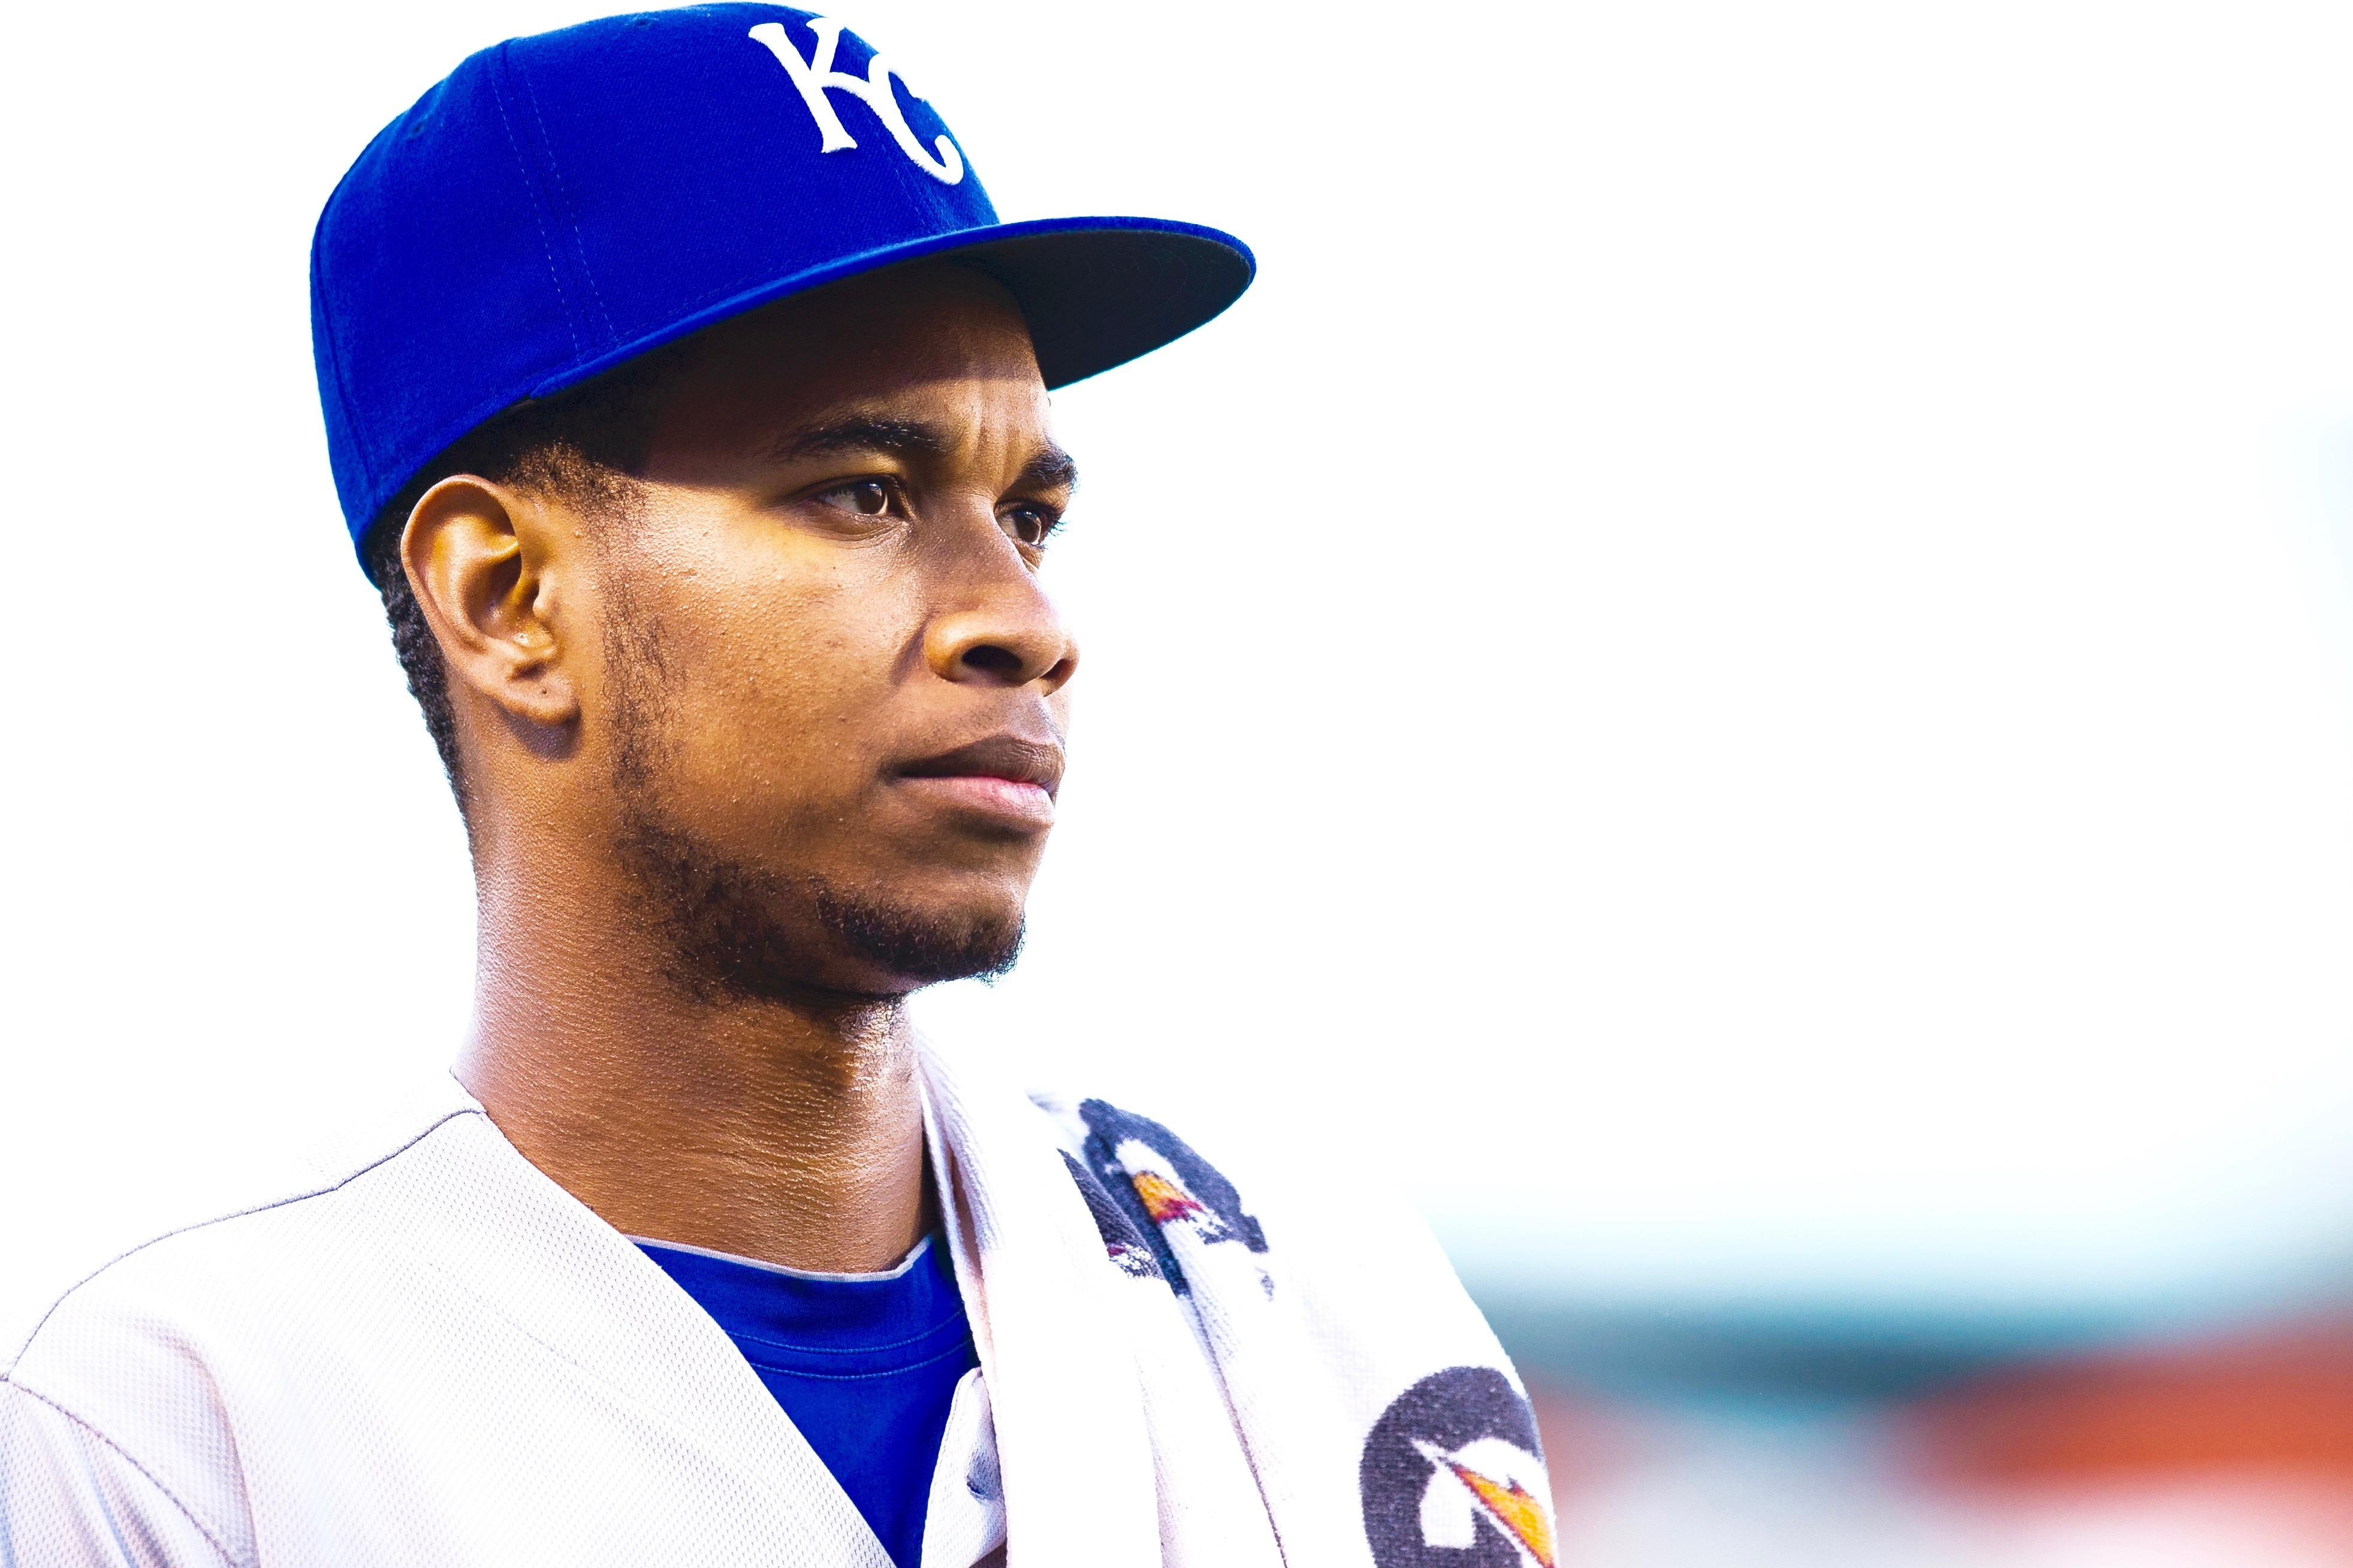 MLB community mourns deaths of Yordano Ventura and Andy Marte - ESPN